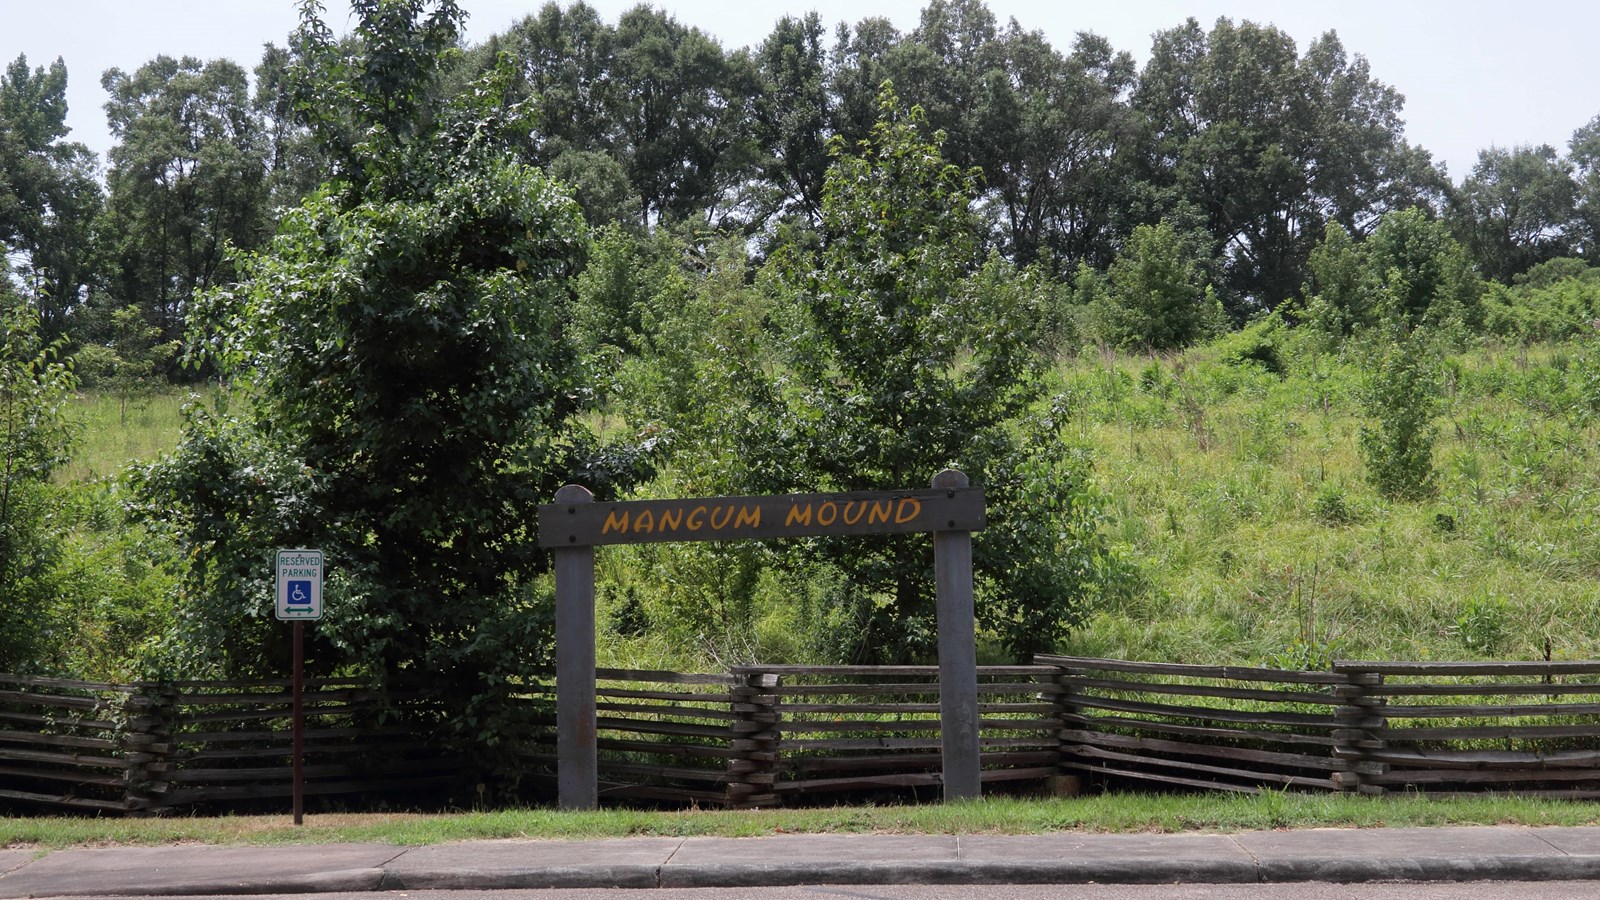 A hill of grass surrounded by trees, a split rail fence and wooden overhead sign, Mangum Mound